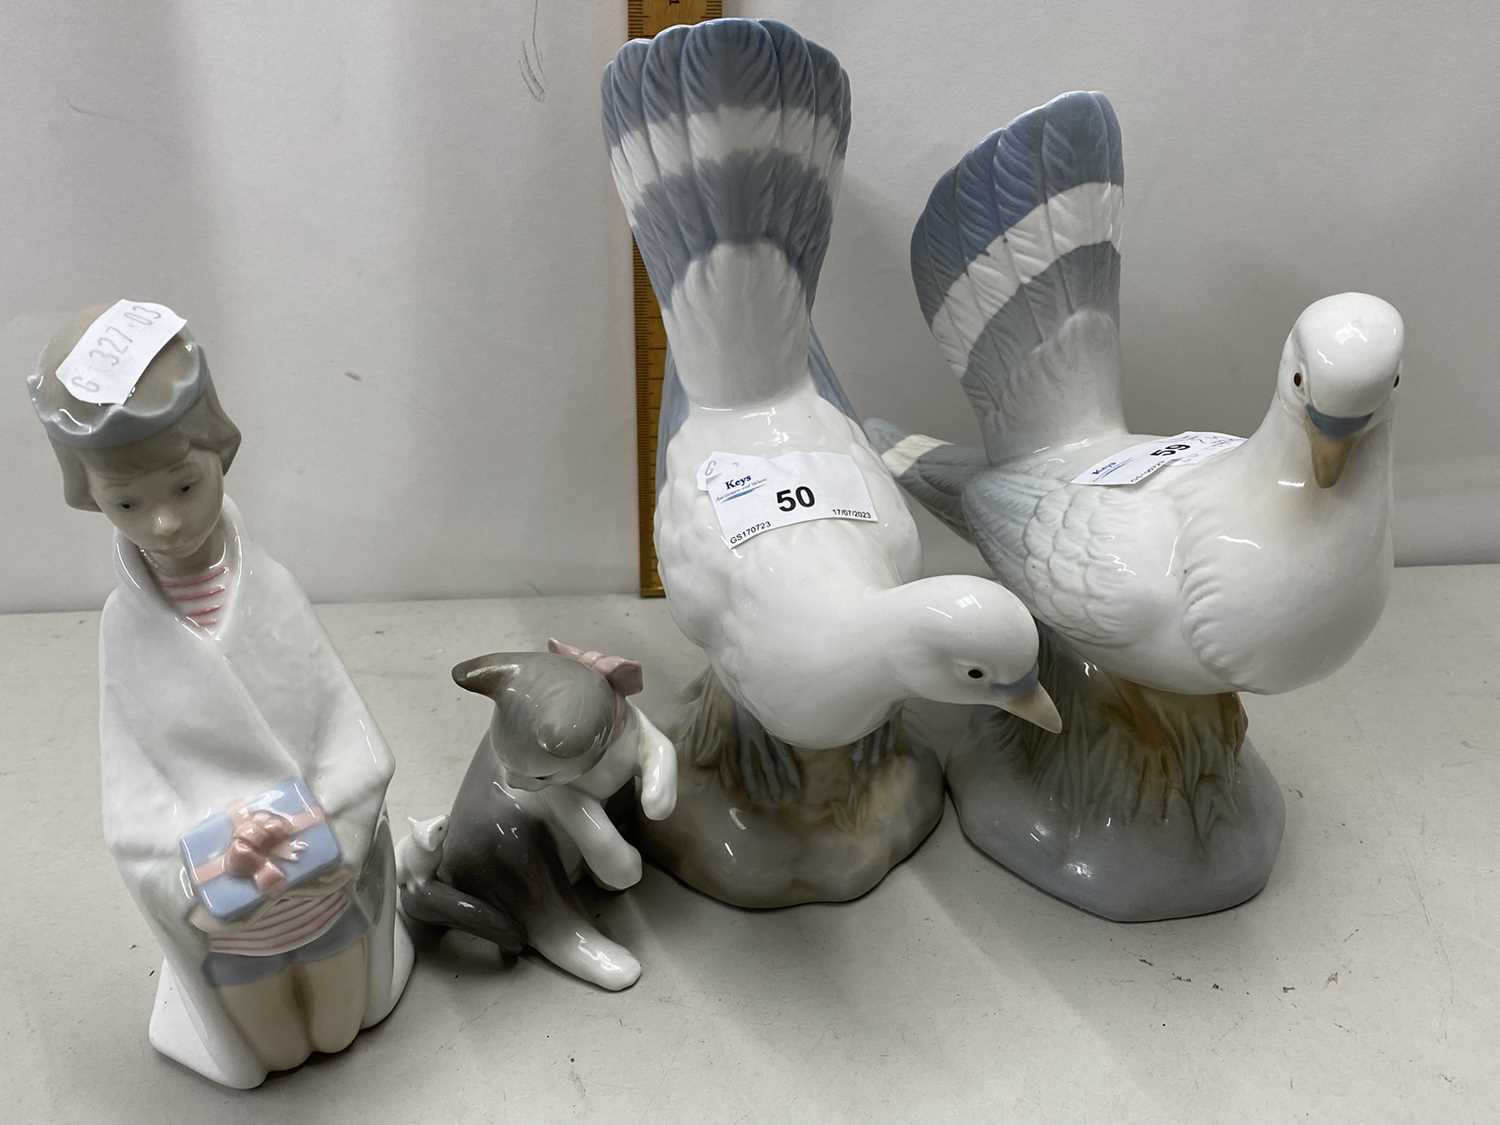 Lladro model of a cat and mouse together with a further Lladro model of a figure praying and two